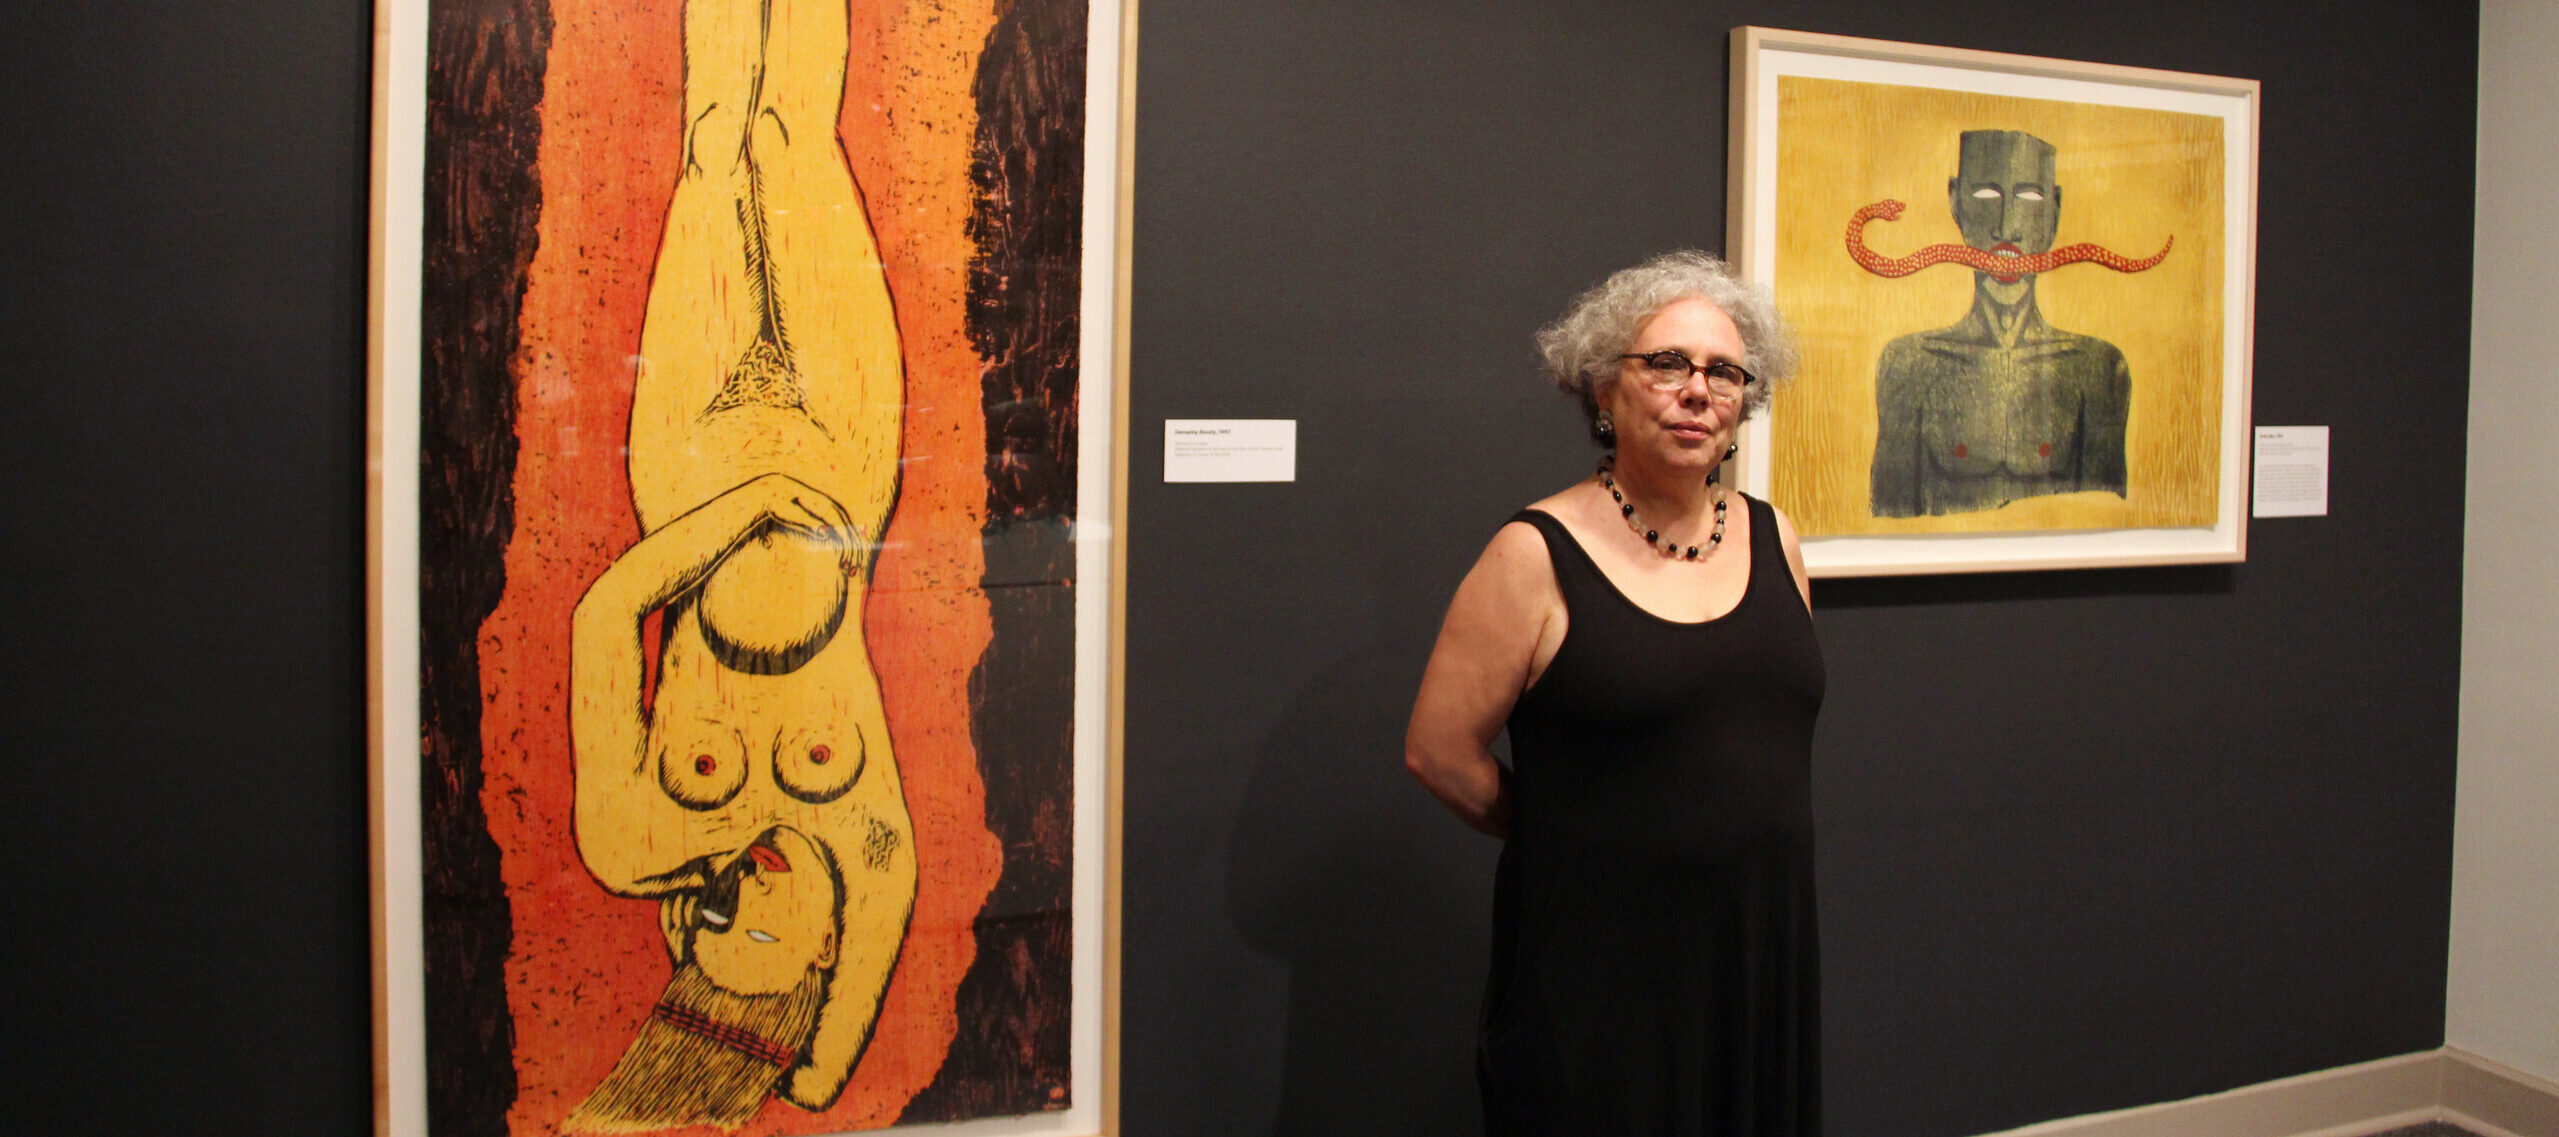 The artist, a woman with light skin, curly gray hair, and glasses, wears a black sleeveless dress and necklace while standing in a gallery in front of two of her large colorful prints.